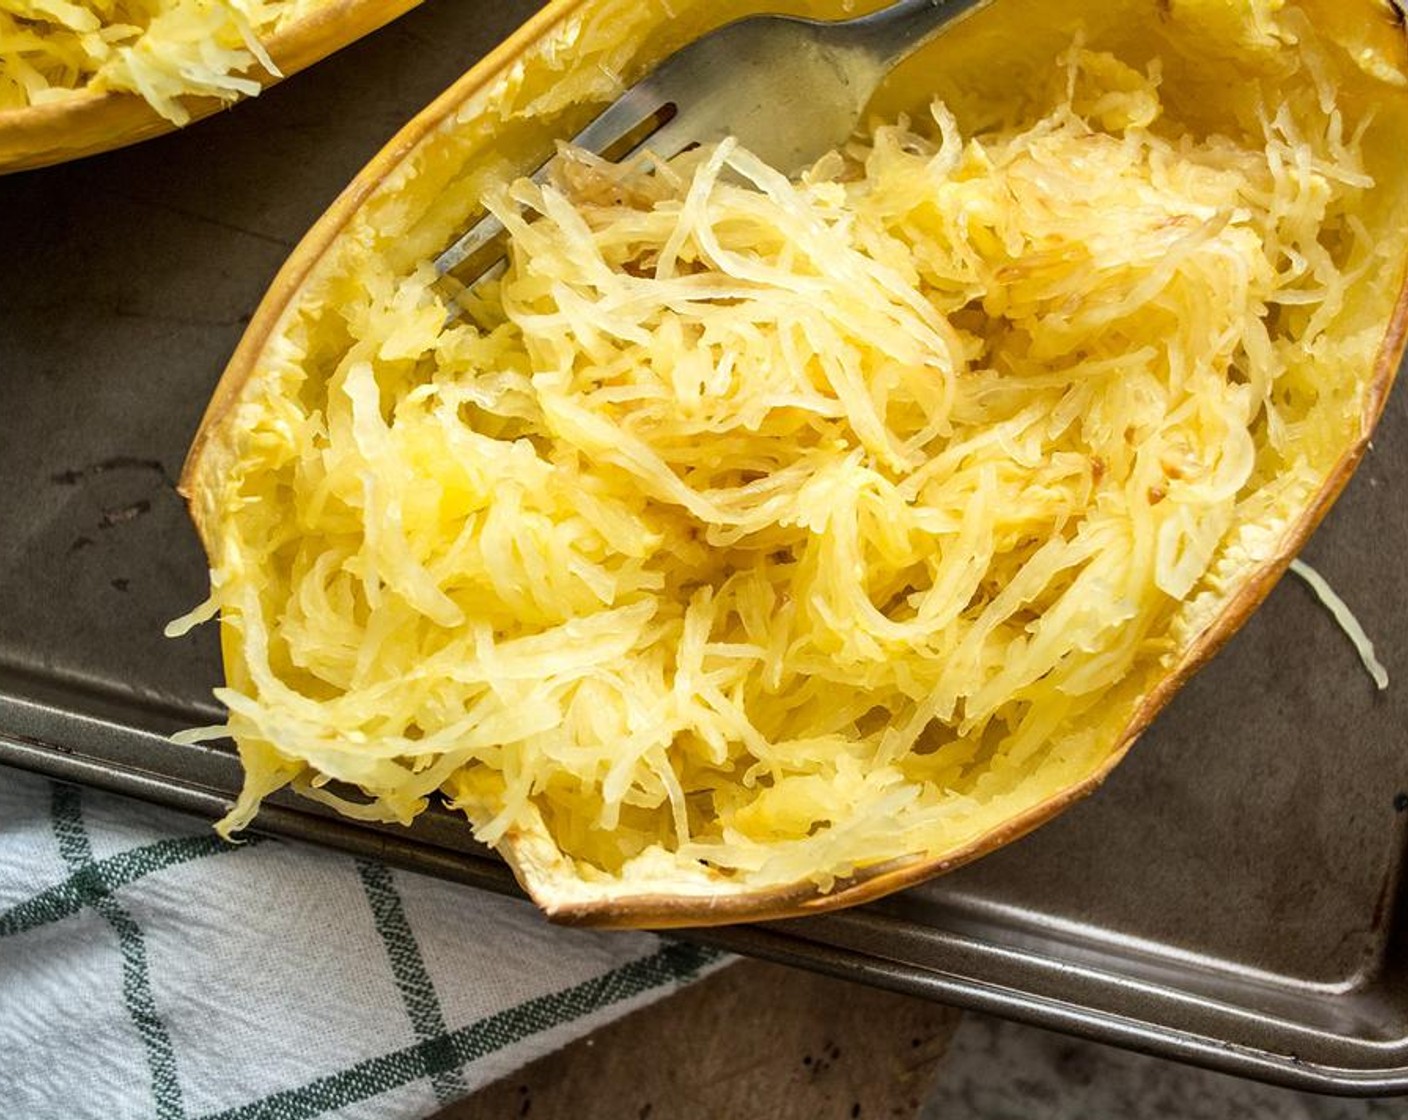 step 2 Cut Spaghetti Squash (1) lengthwise, remove seeds and add to cookie sheet faced down. Bake for 45-50 minutes or until flesh can be combed with a fork and has a pasta-like texture. Set aside to cool.